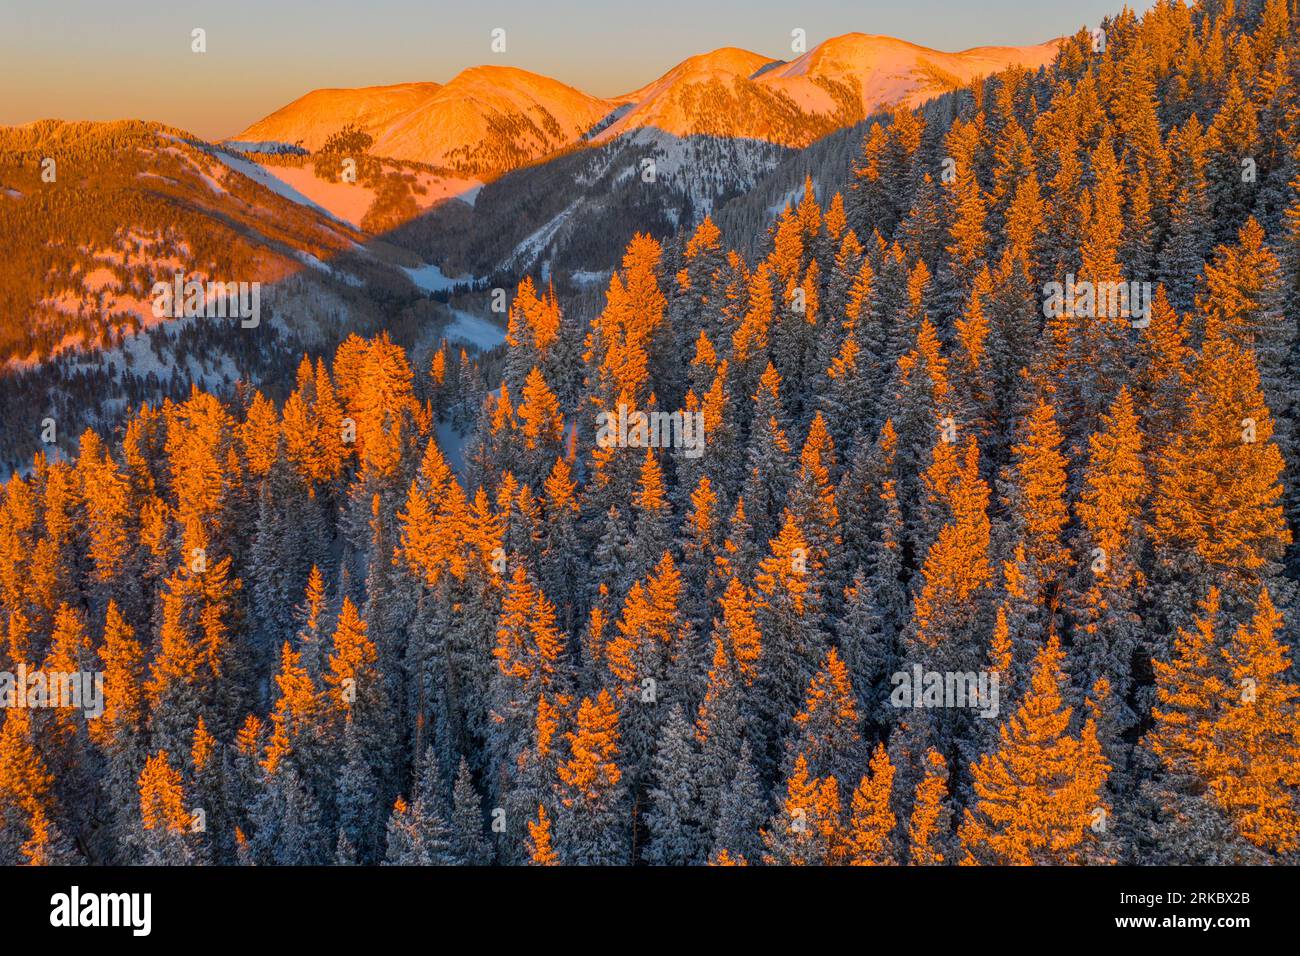 Frosted trees and peaks, Manti-La Sal National Forest, Utah, Colorado River Canyons near Moab, Manti-La Sal National Forest, Utah, Colorado River Cany Stock Photo